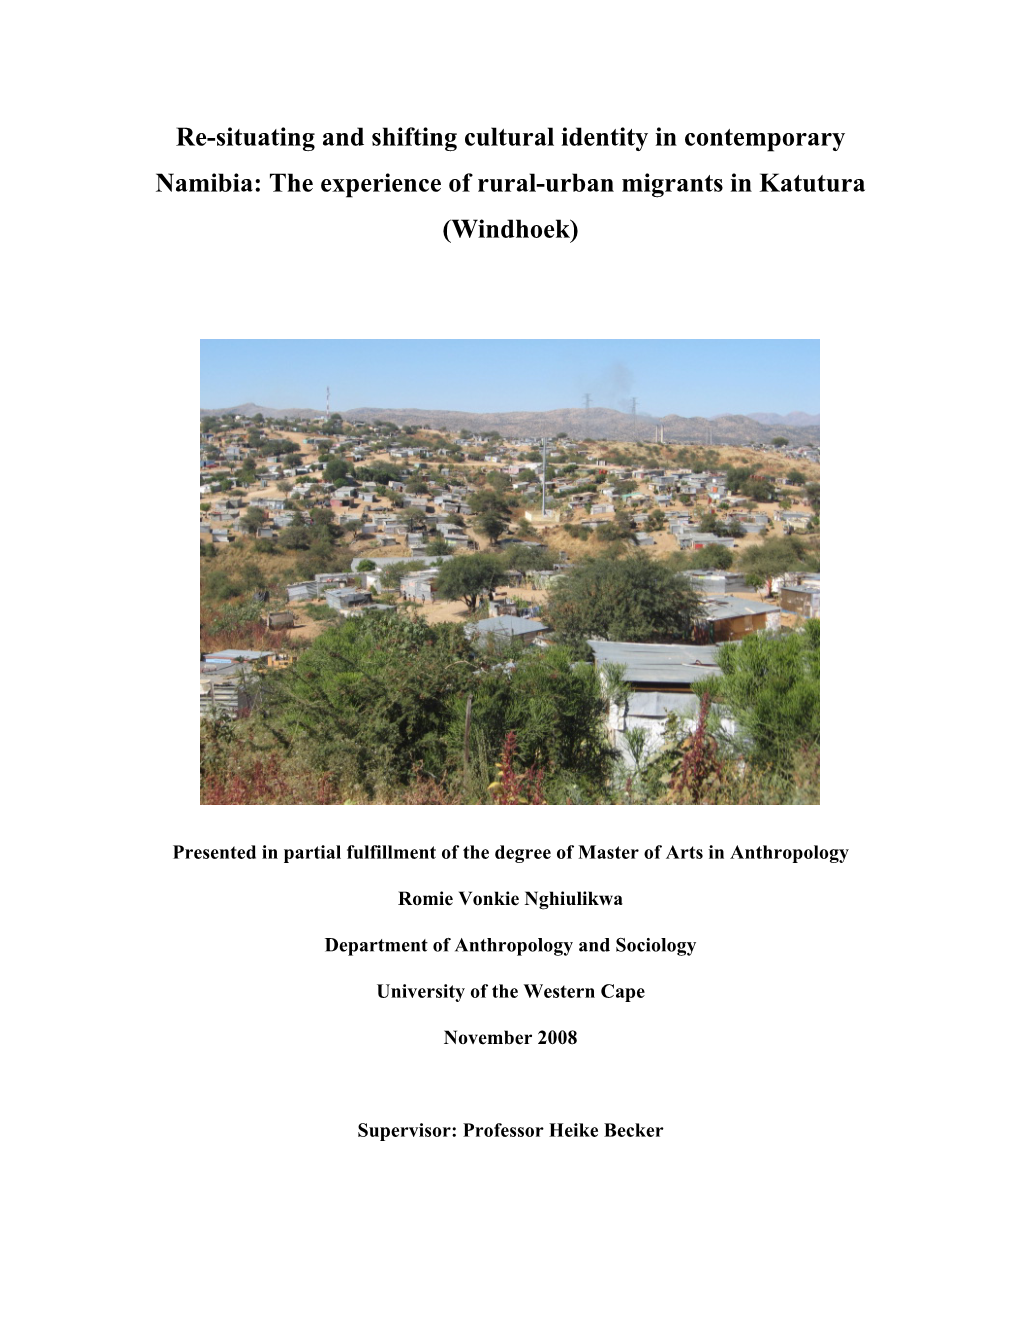 Re-Situating and Shifting Cultural Identity in Contemporary Namibia: the Experience of Rural- Urban Migrants in Katutura (Windhoek)